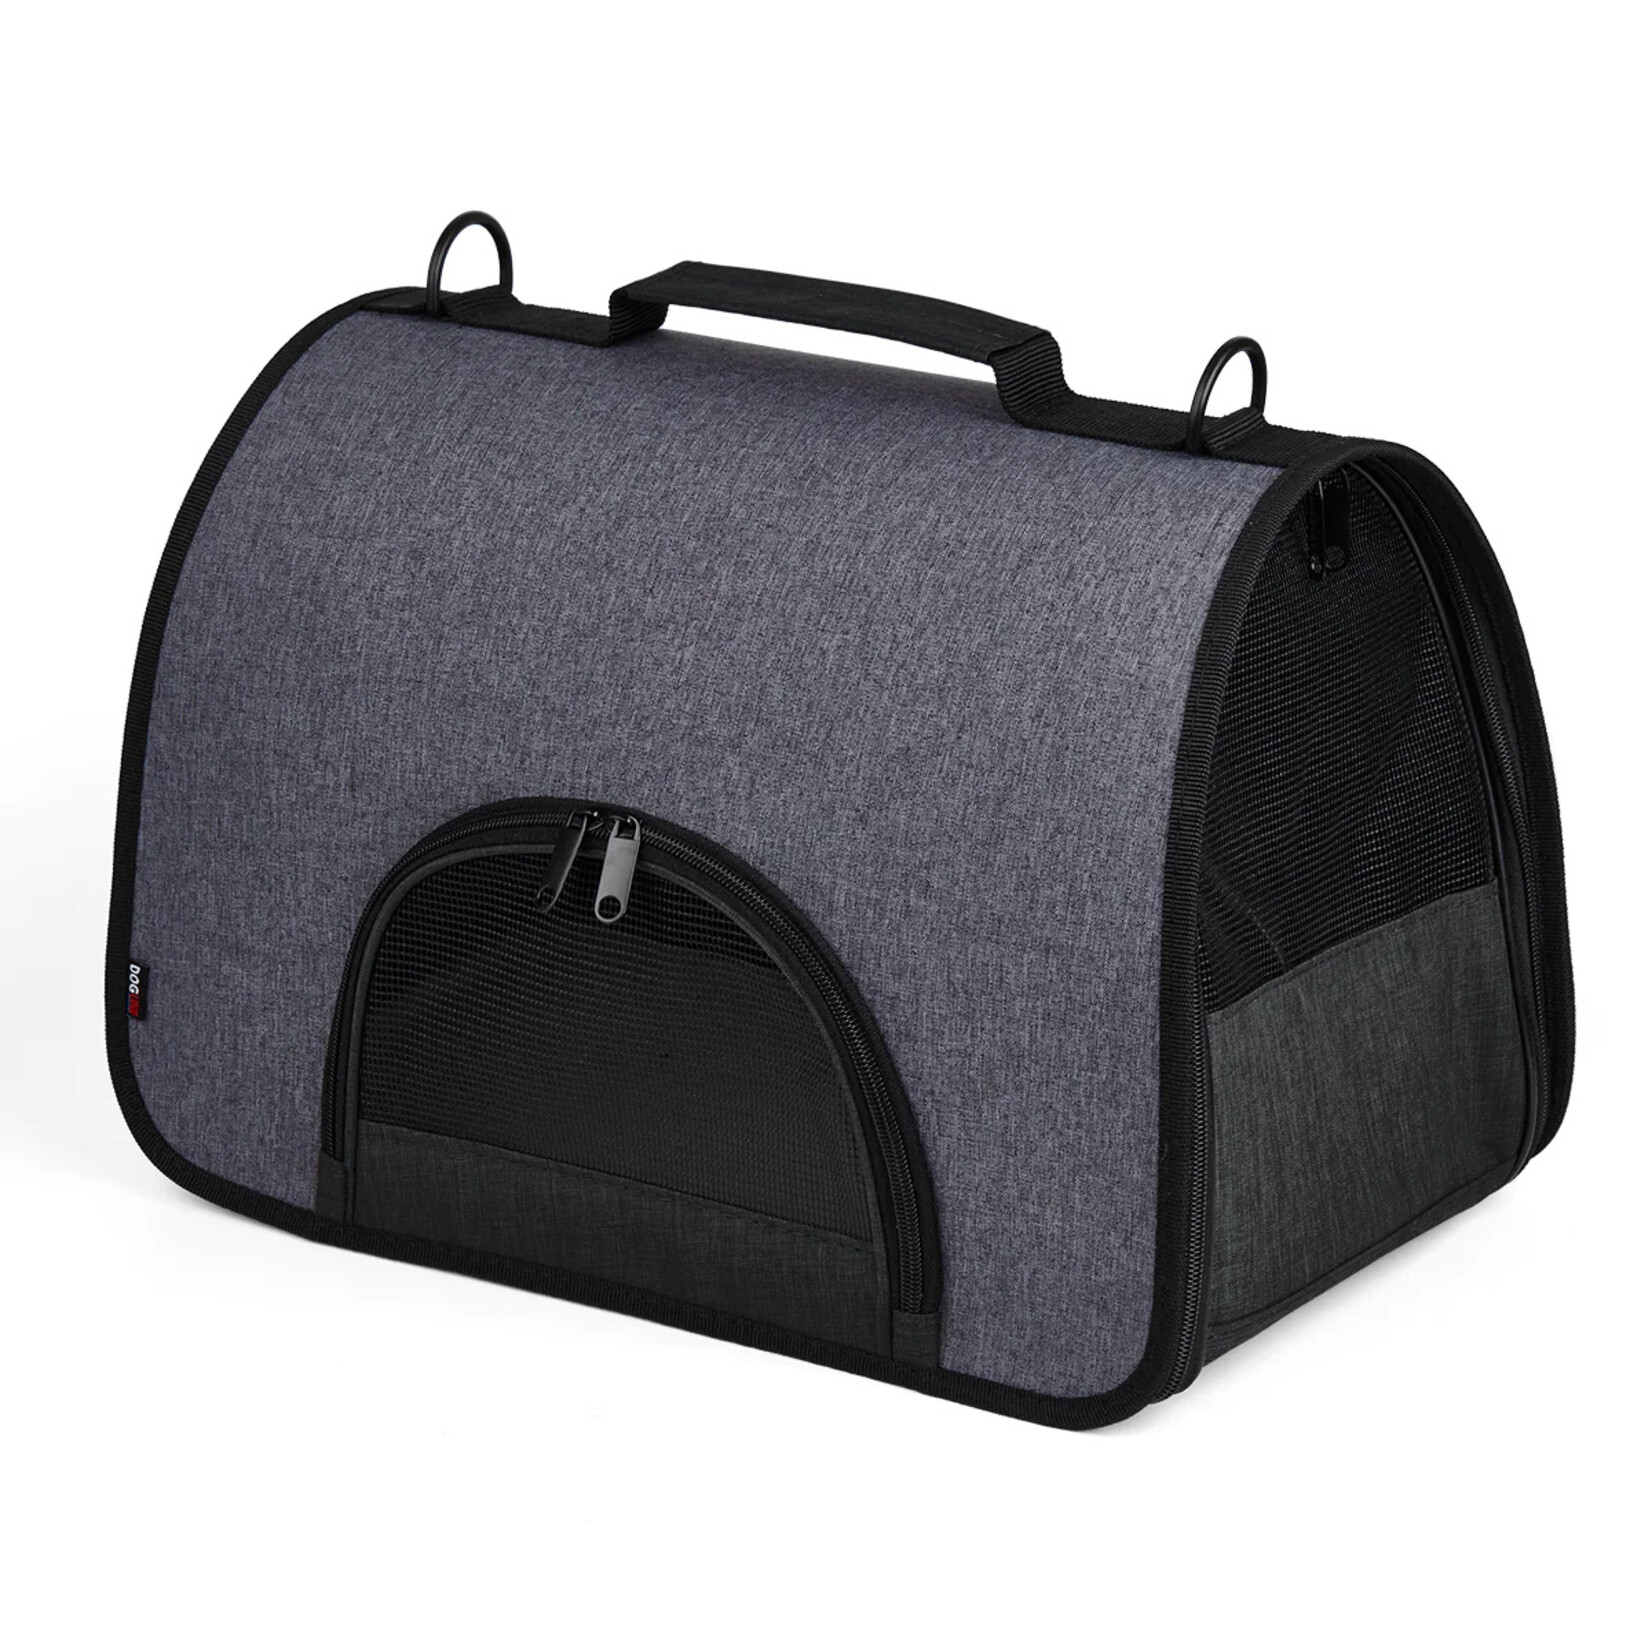 Dogline Dogline Dual Color Collapsible Pet Carrier